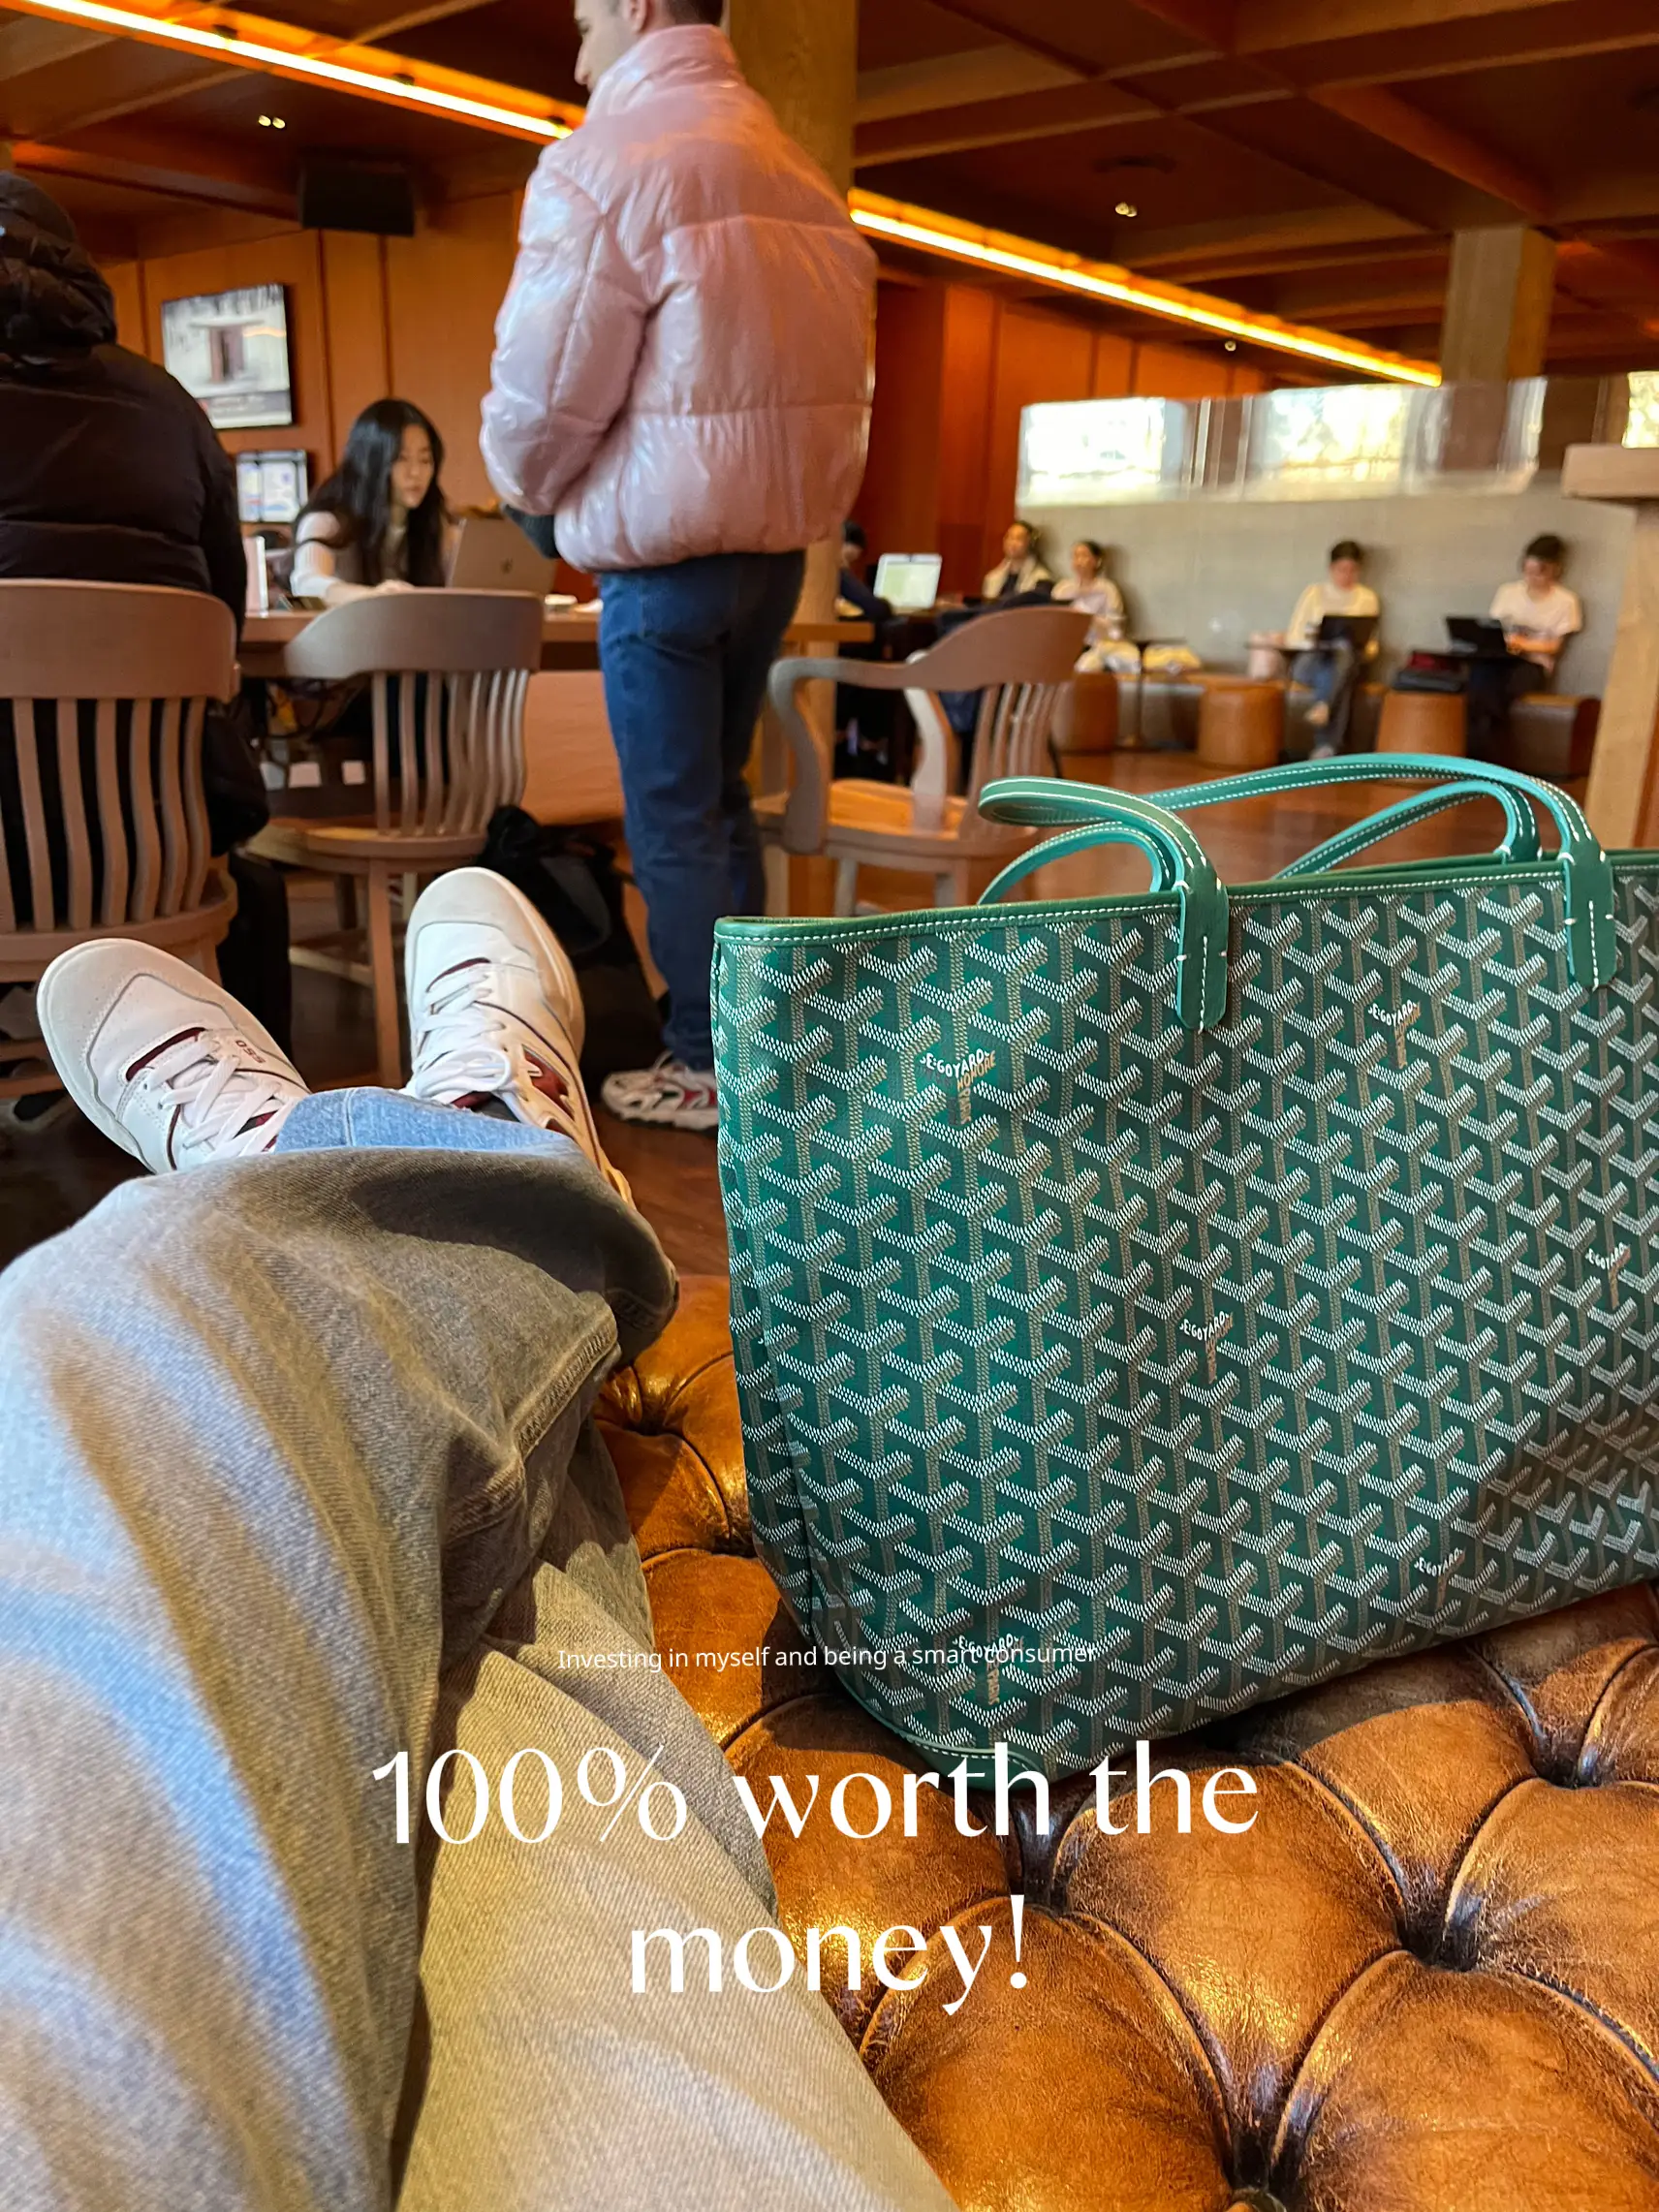 Goyard Artois MM Tote  vs. the St. Louis, current prices, first  impressions 